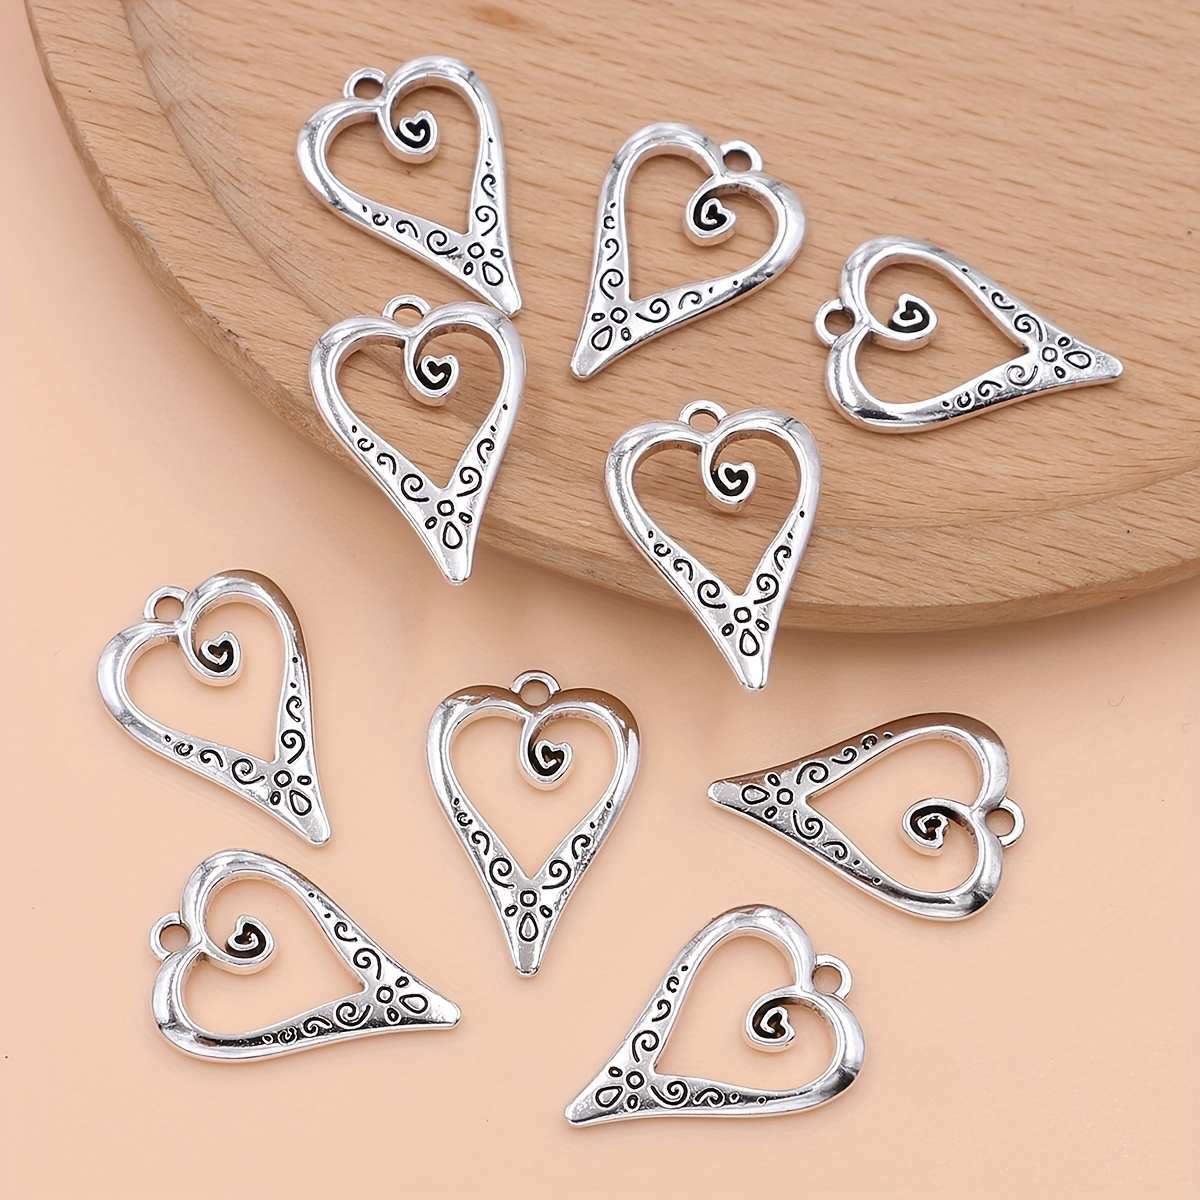 Open Heart Charms, Silver Heart Charms for Jewelry Making, Wine Charms, Valentine Crafts, Qty 6